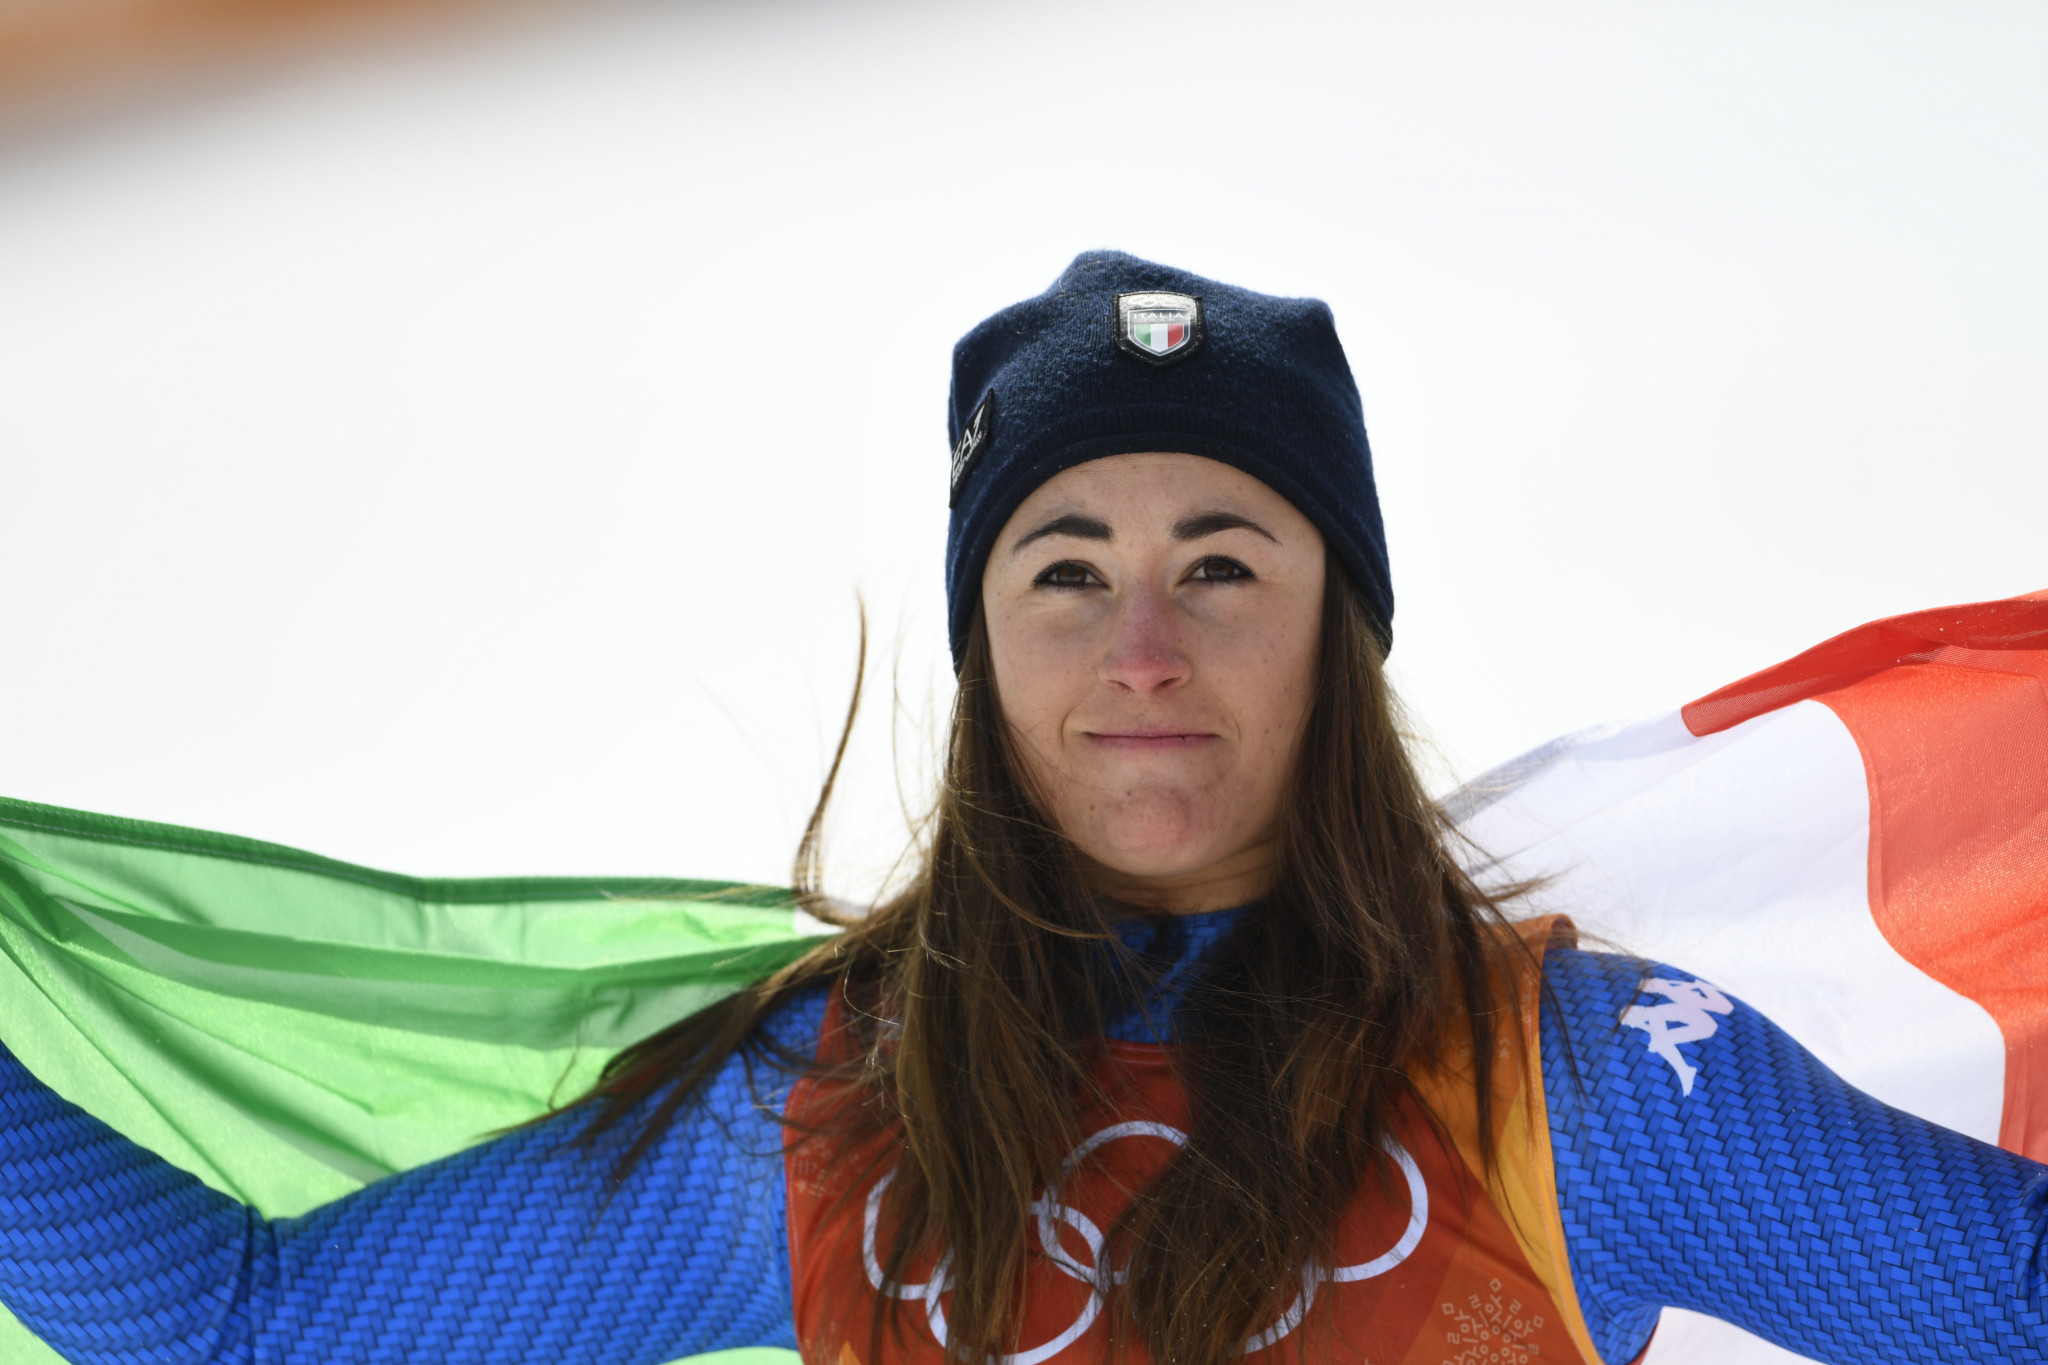 Sofia Goggia has apologised for homophobic comments made in an interview ©Getty Images